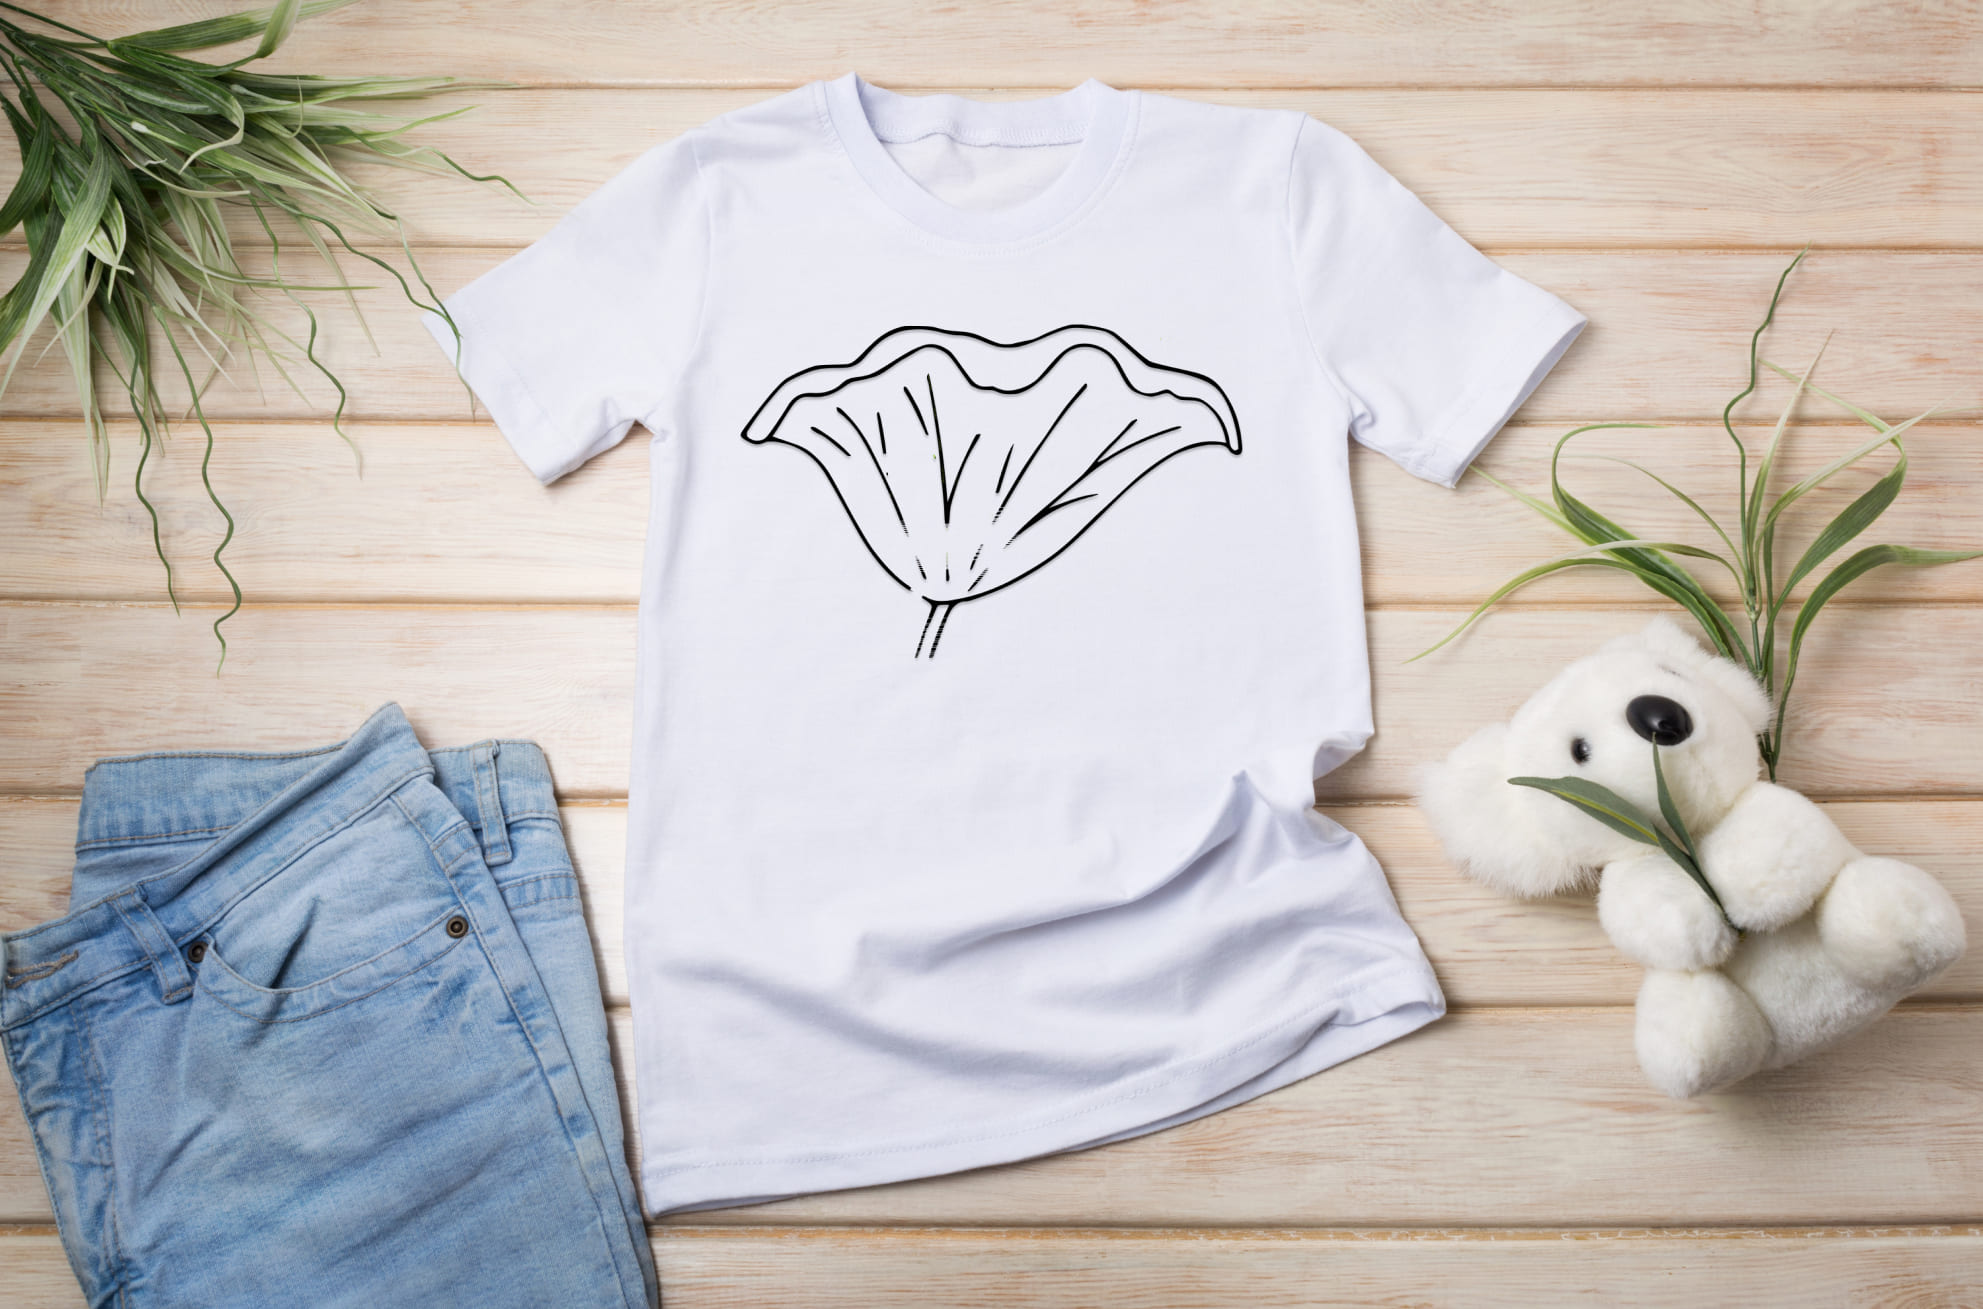 Cool lotus for your t-shirt.